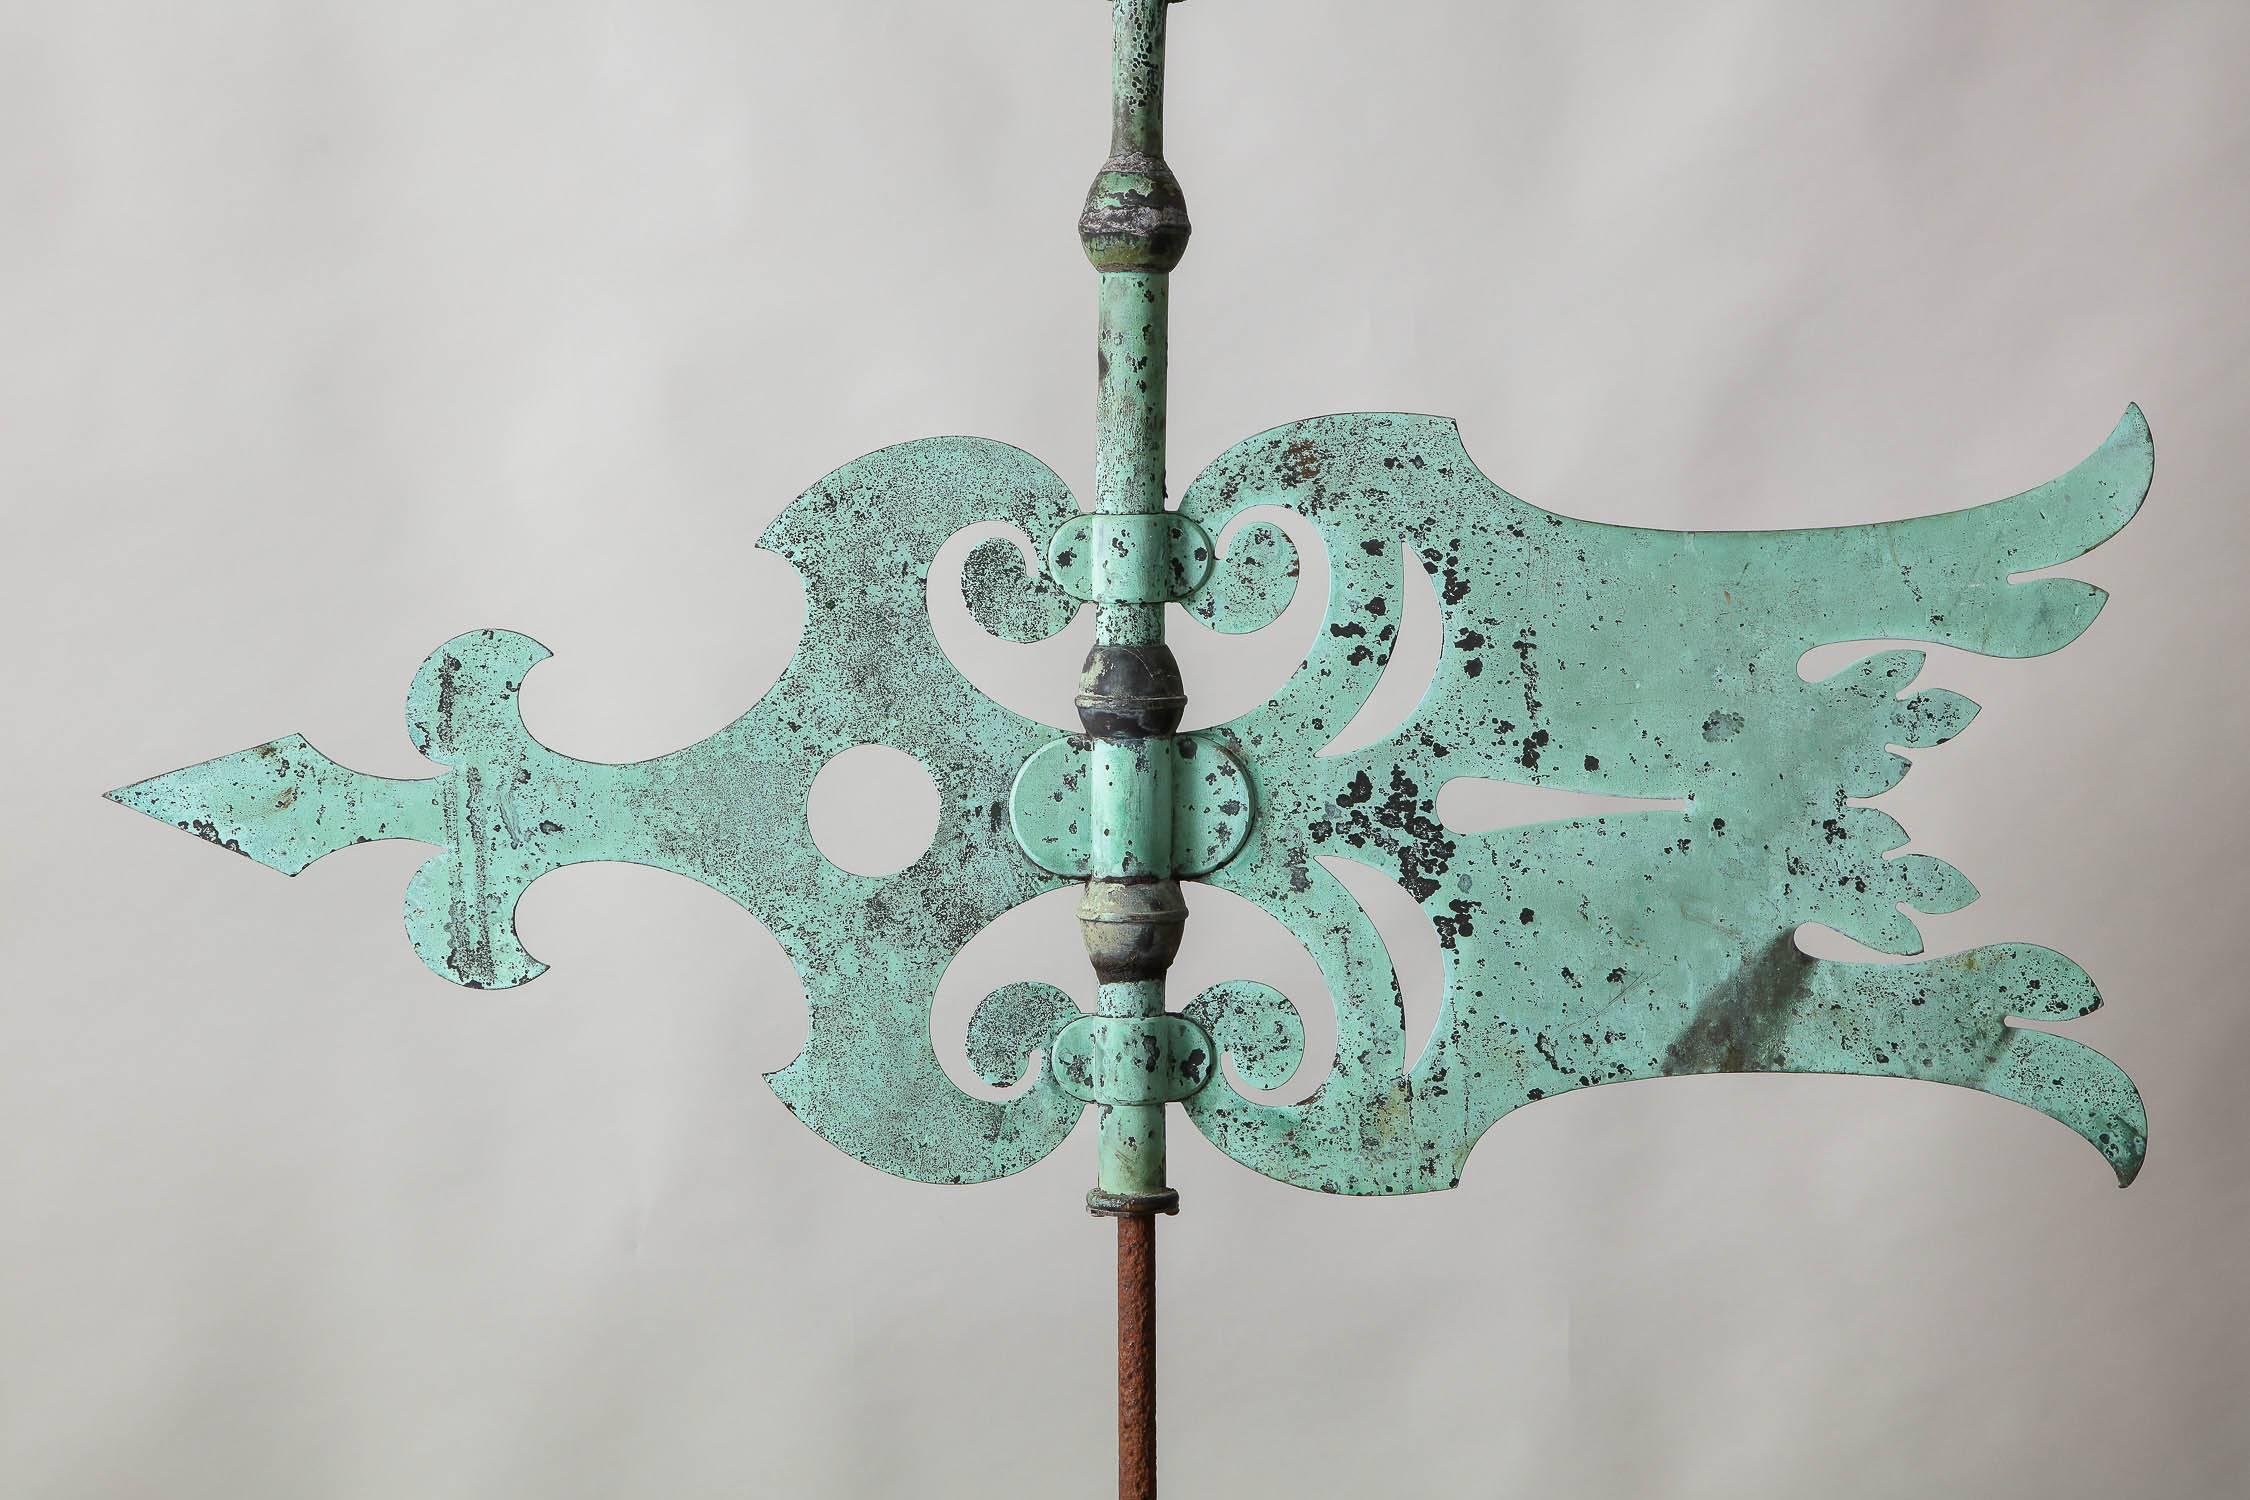 Striking English copper weathervane having exceptional weathered surface in the form of a flying banner with spear finial, fleur-de-lis pointer and pierced decorated body. Great form and imposing scale.